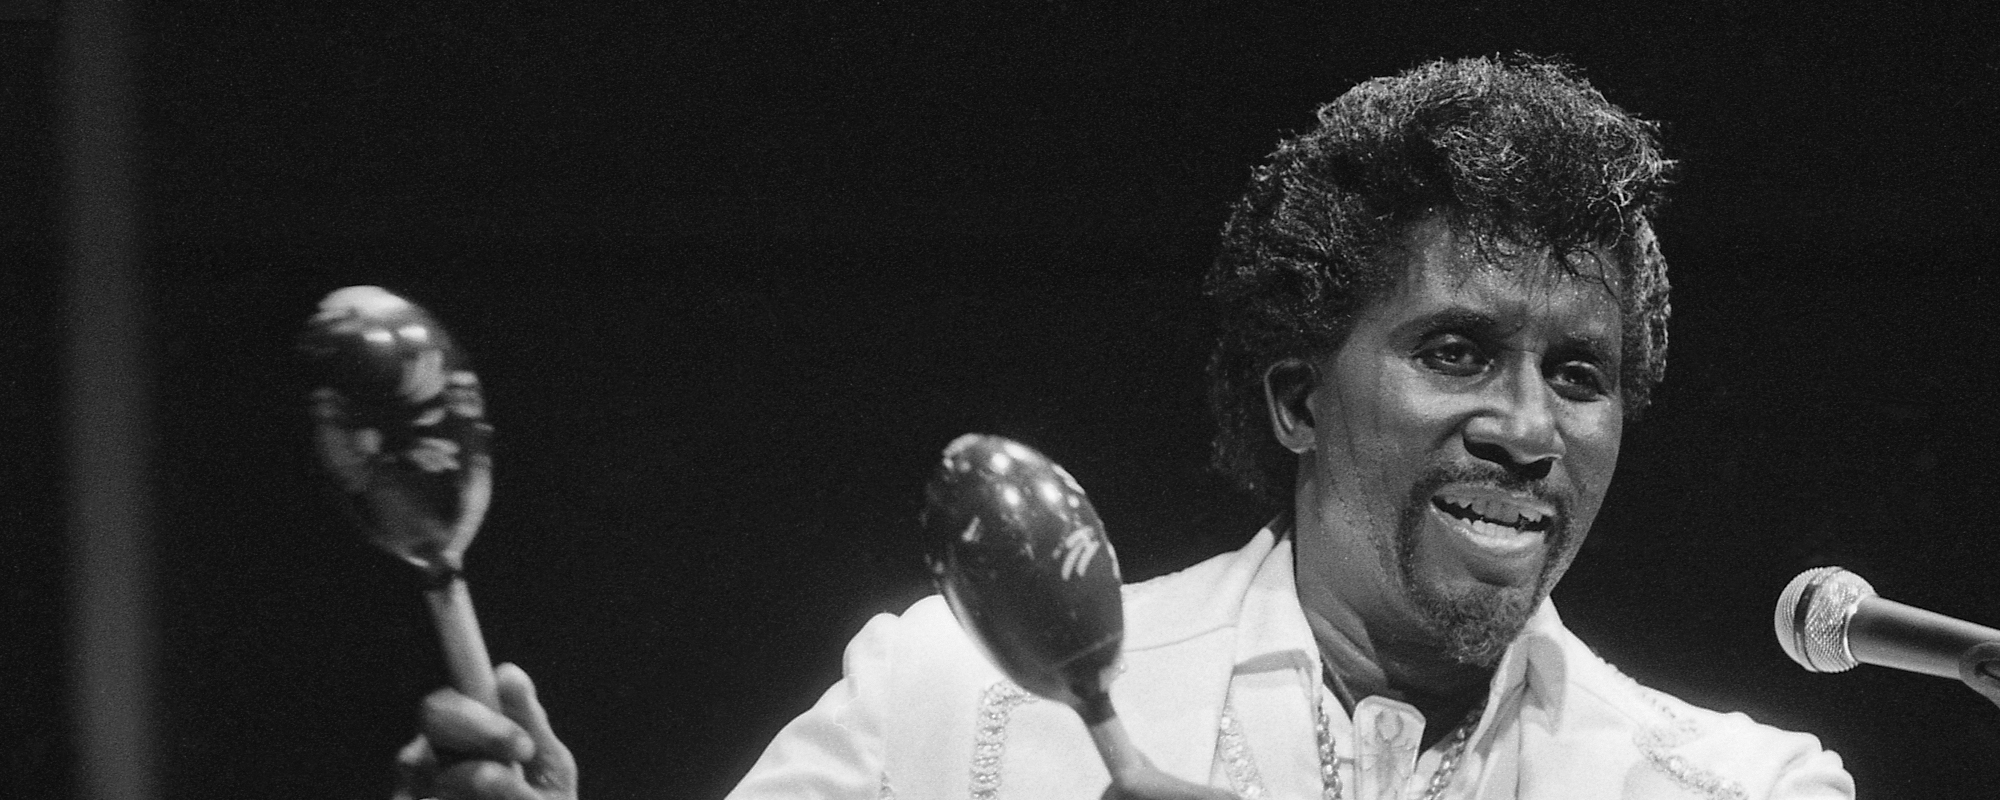 The Story Behind “I Put a Spell on You” by Screamin’ Jay Hawkins